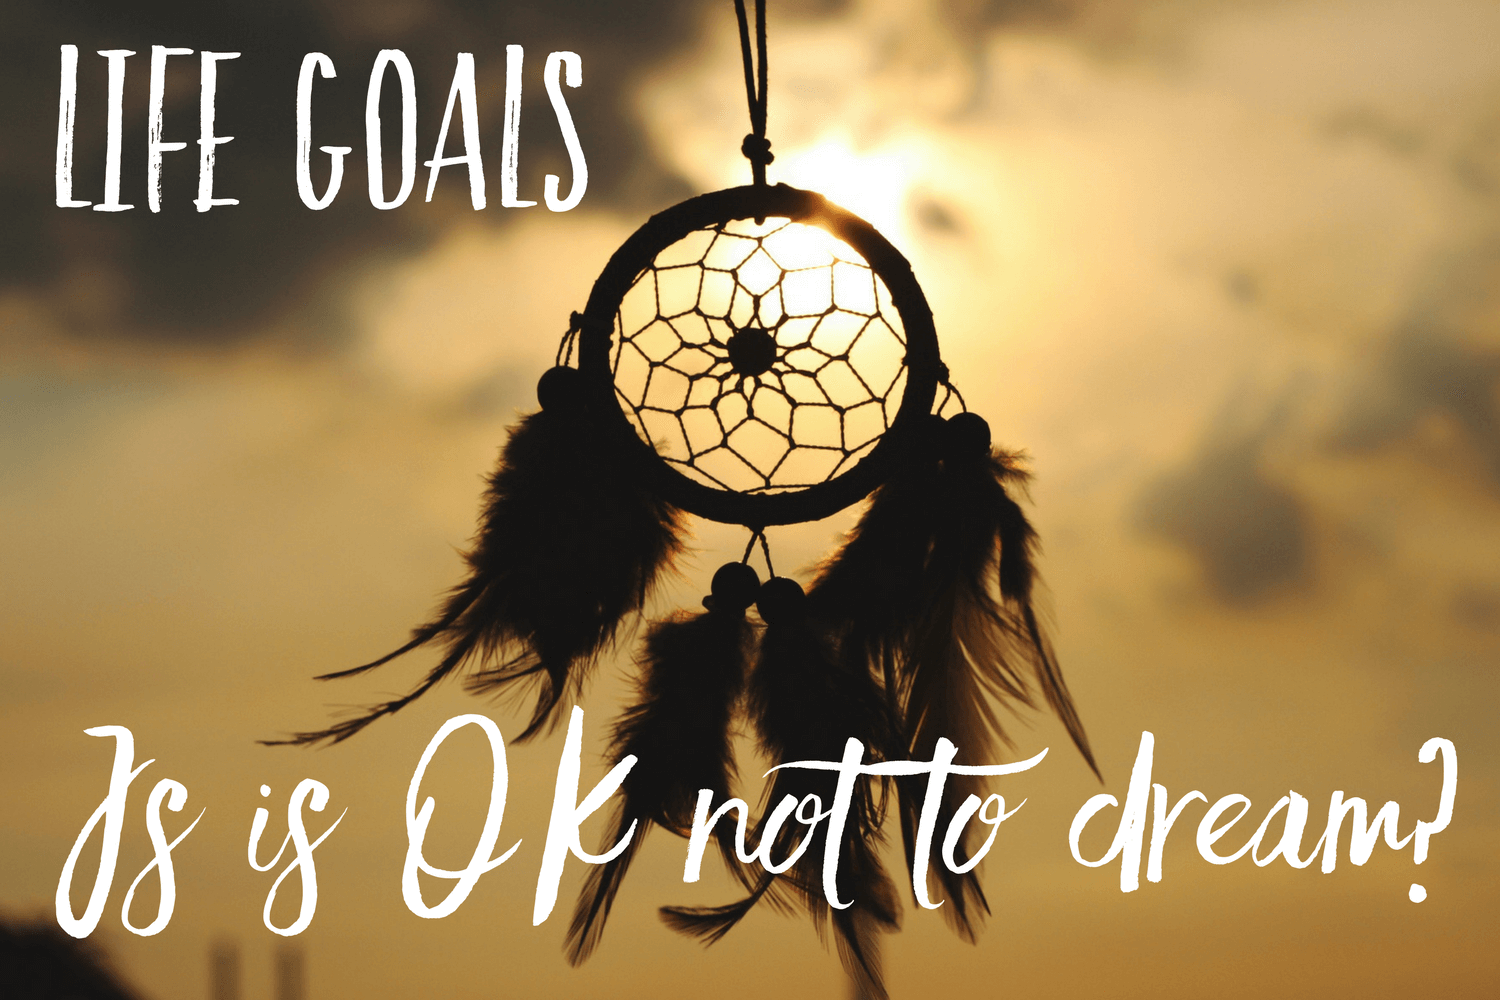 Life goals - is it OK not to dream?